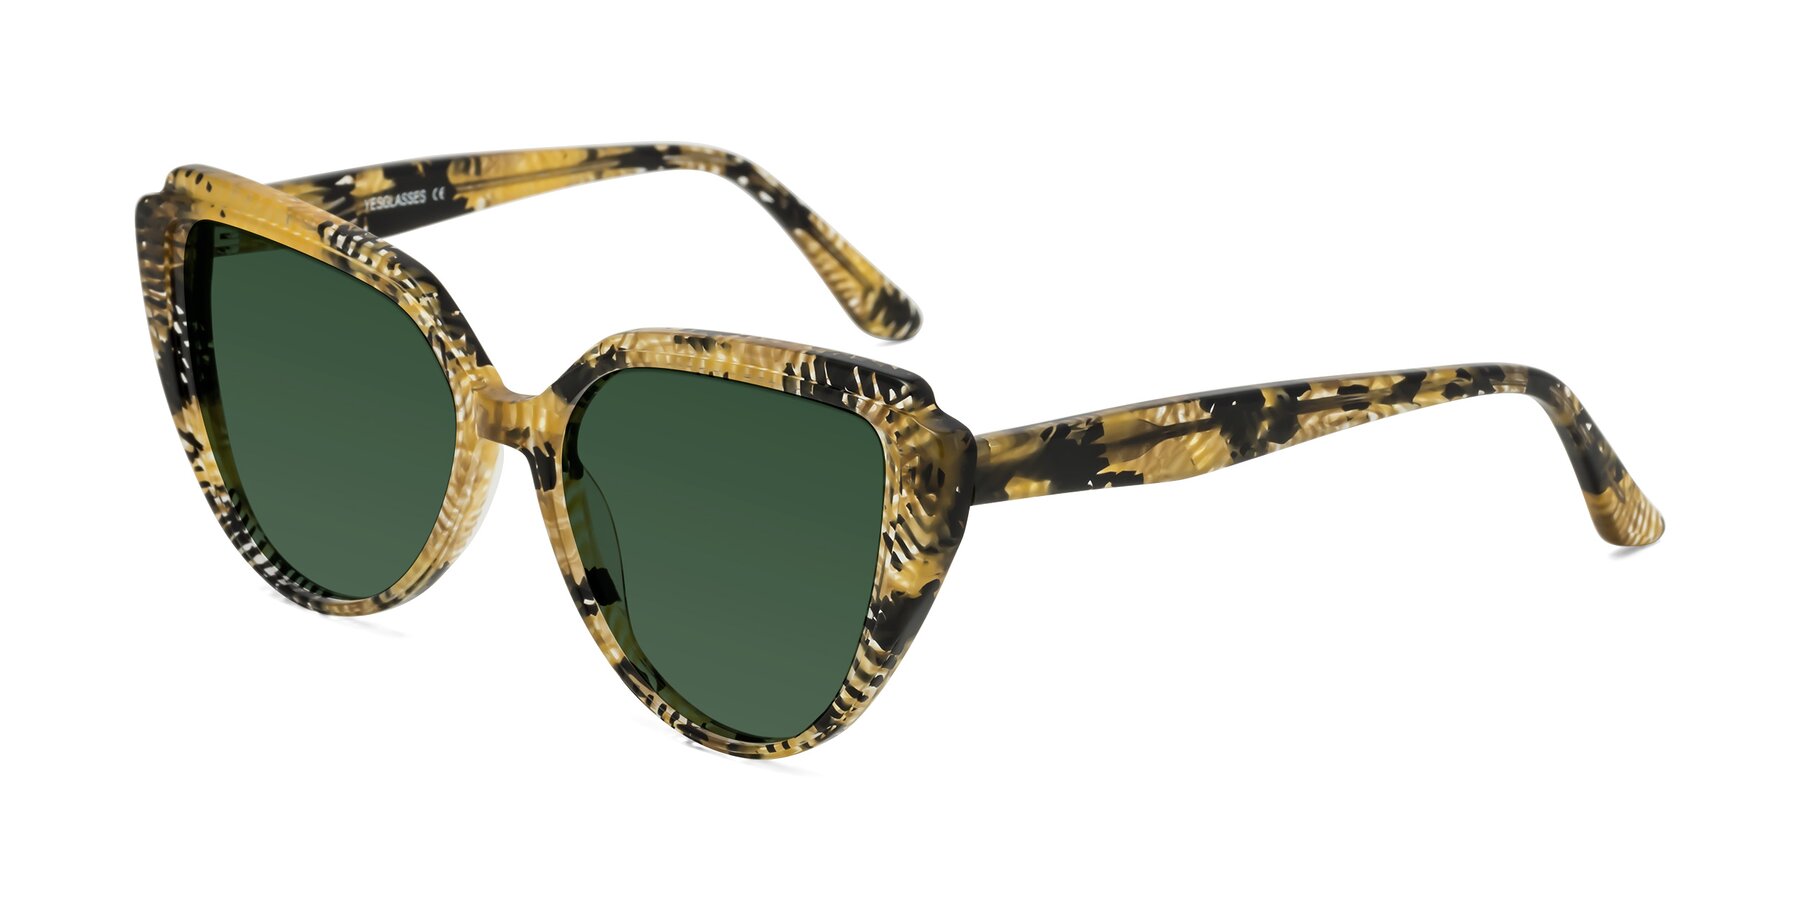 Angle of Zubar in Yellow Snake Print with Green Tinted Lenses